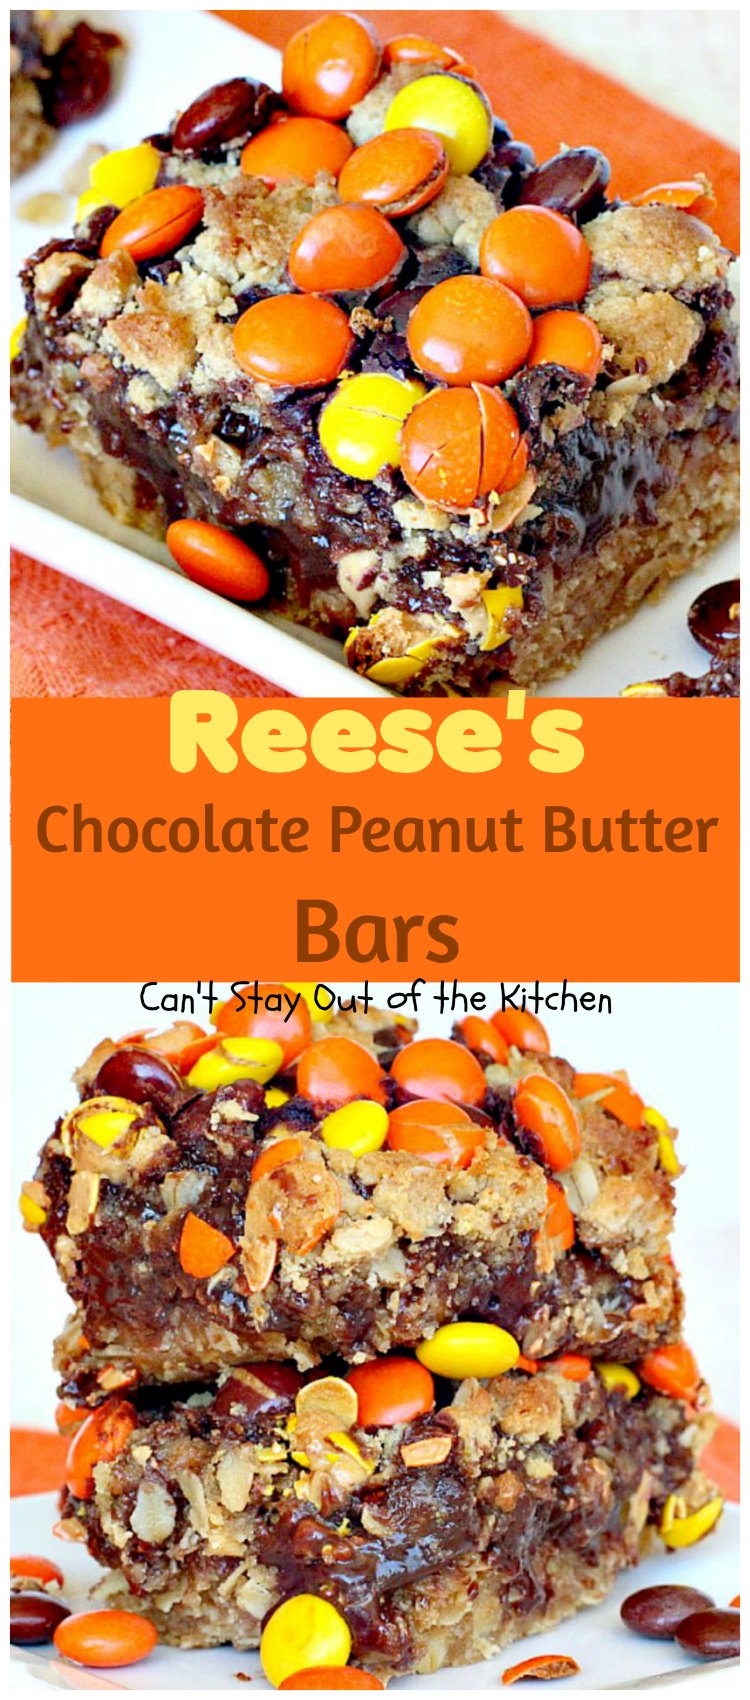 Reese's Chocolate Peanut Butter Bars | Can't Stay Out of the Kitchen | outstanding #oatmeal bar with #peanutbutter, a #chocolate filling and #Reese'scandies. These are phenomenal! #dessert #cookie